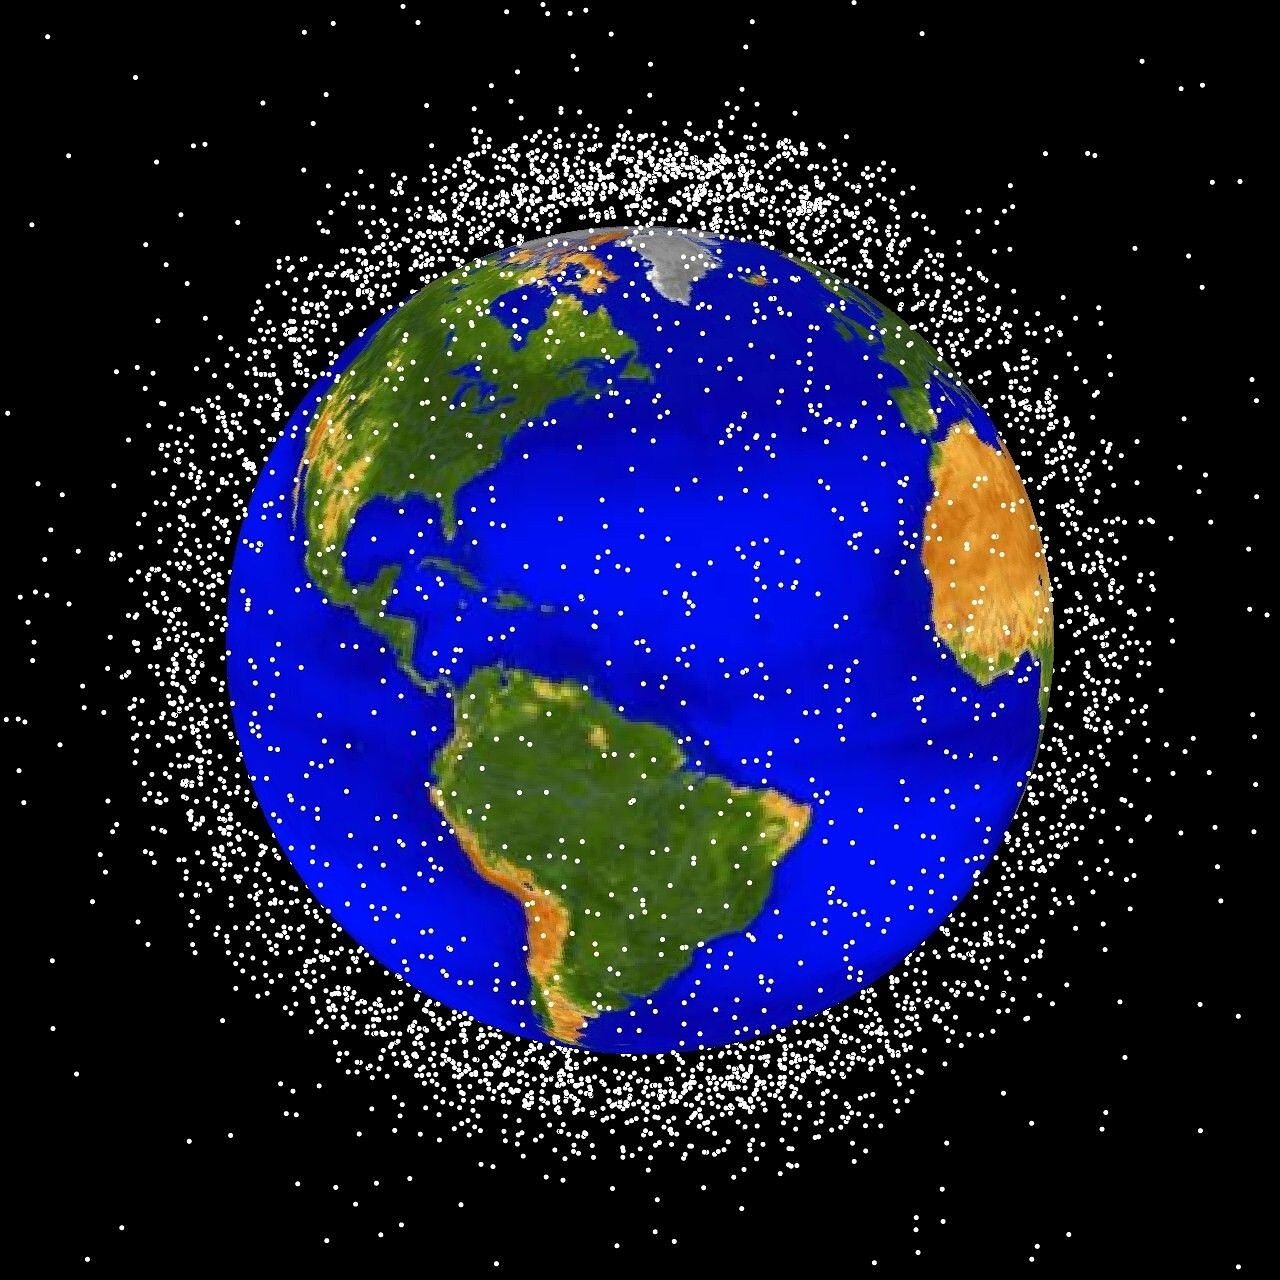 US TV provider given first-ever space debris fine